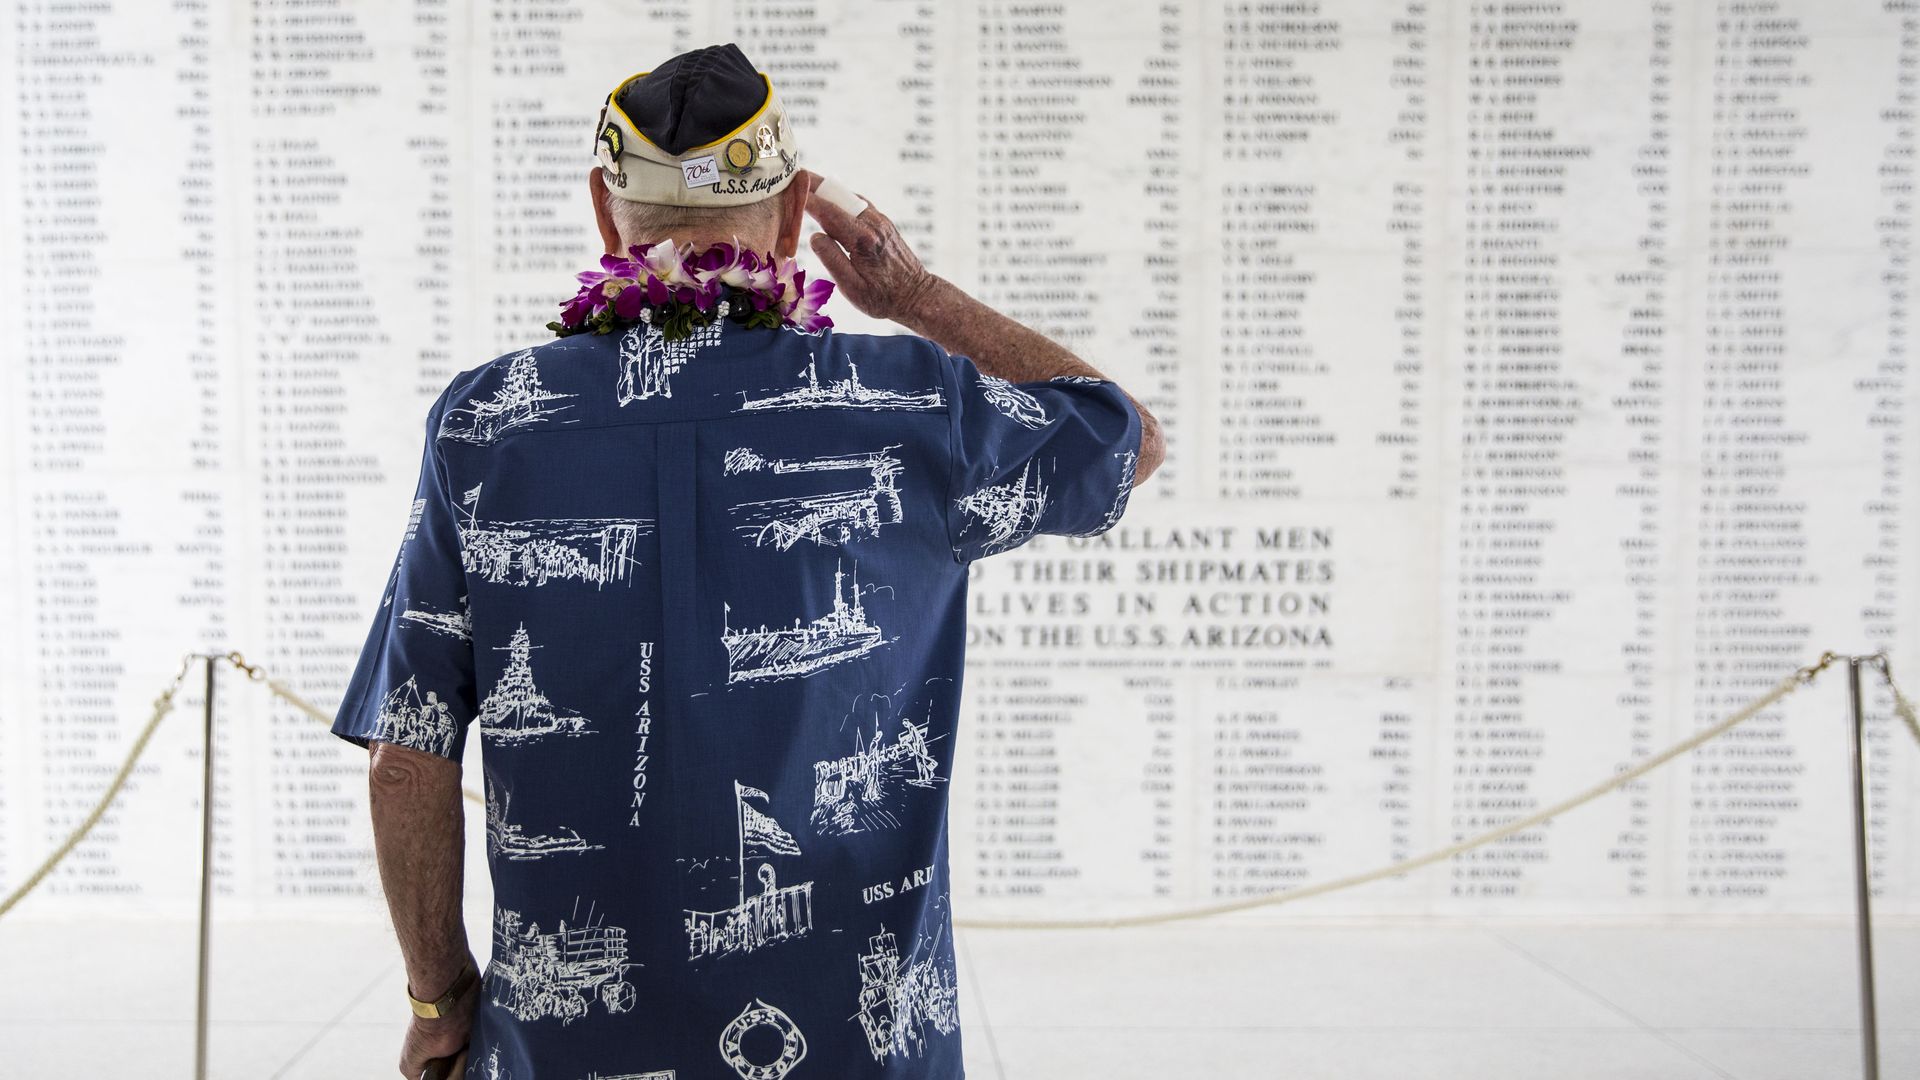 Photo shows an older man saluting a memorial wall with the names of people who died aboard the USS Arizona during the attack on Pearl Harbor